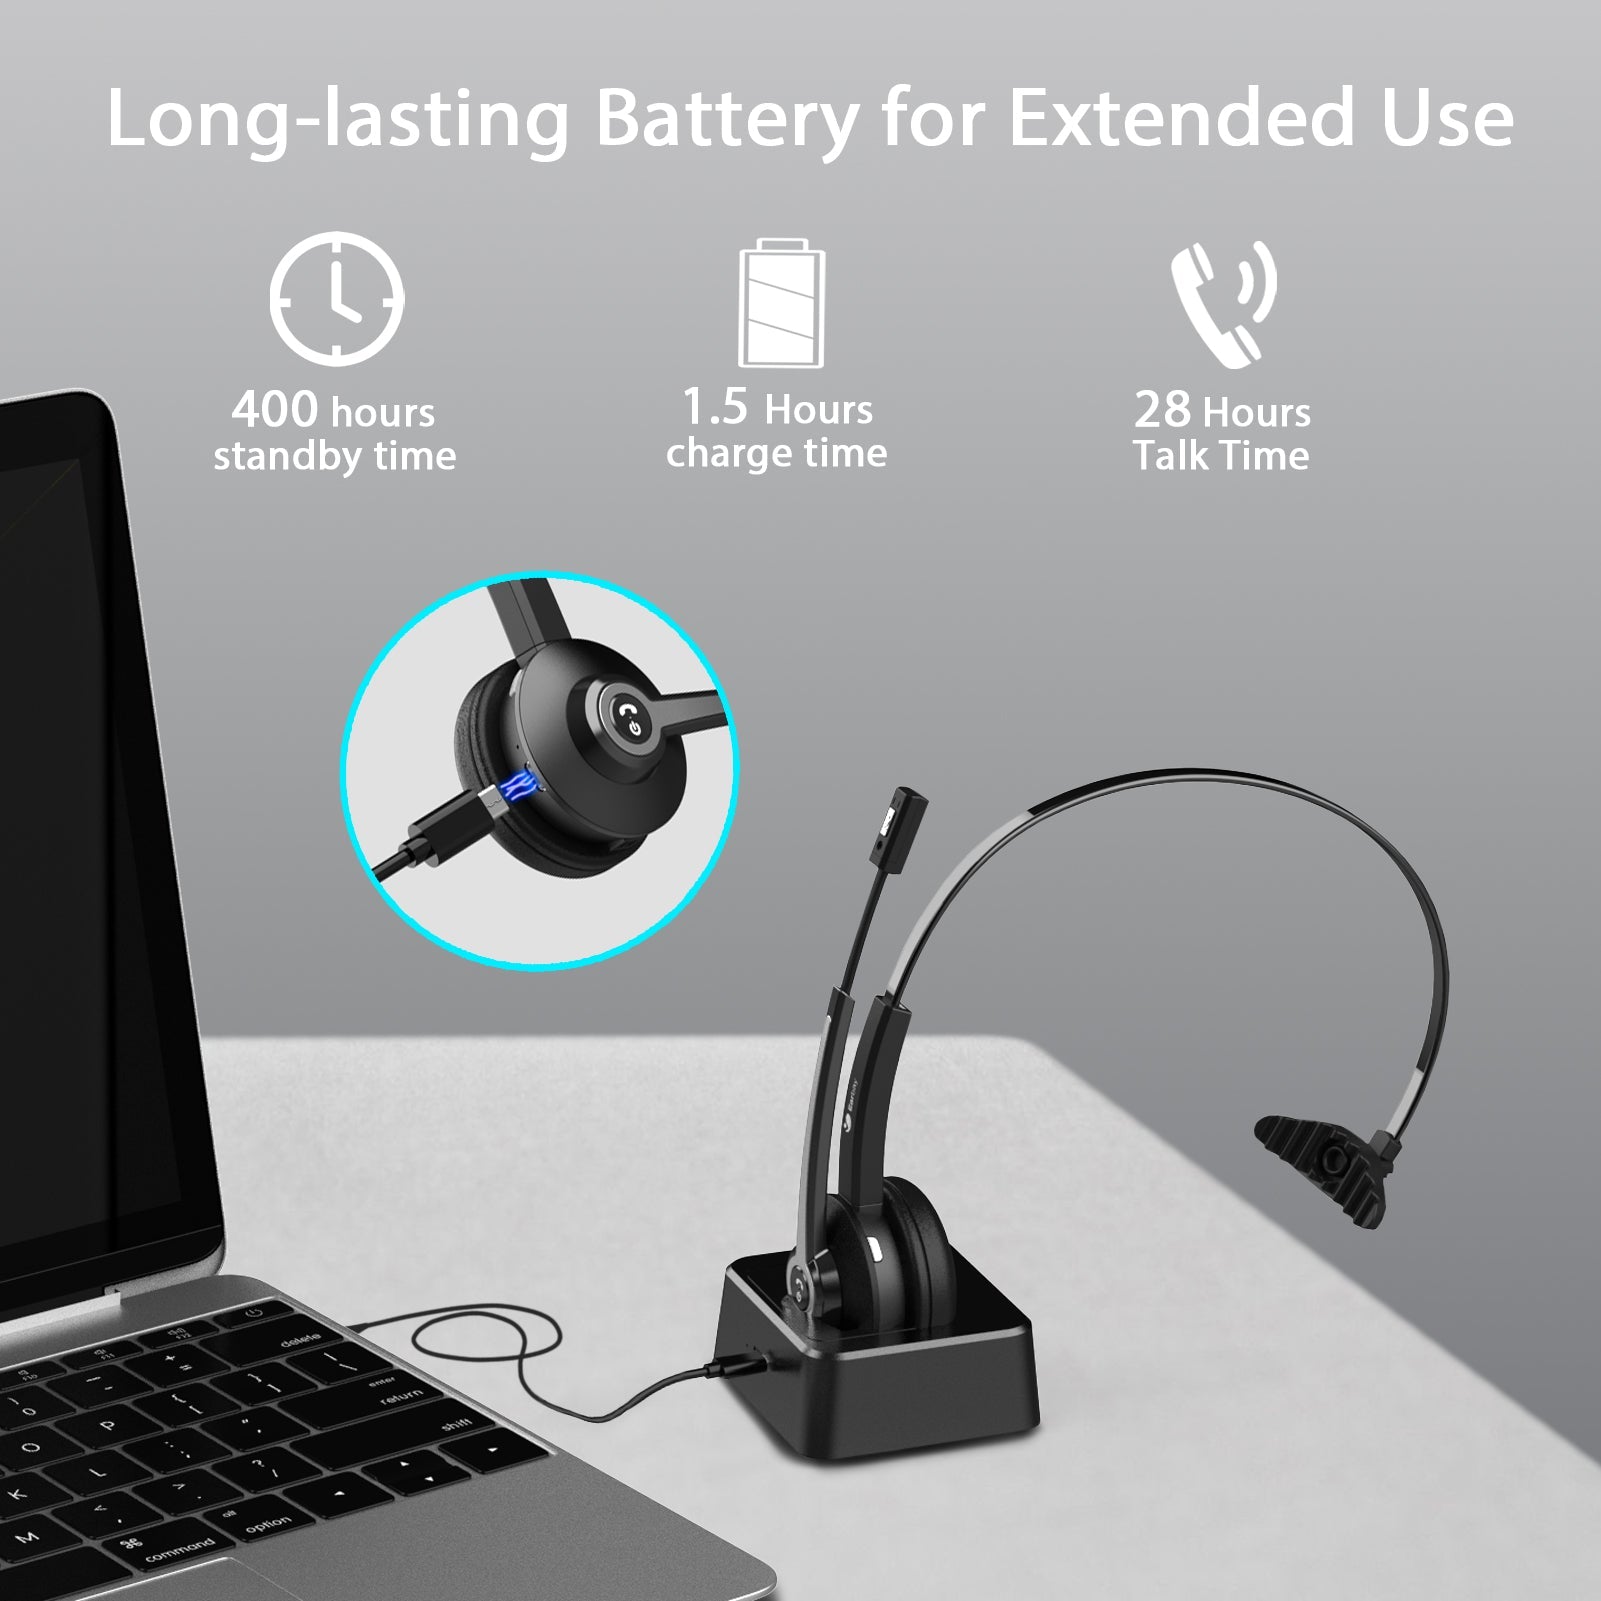 Earbay Trucker Wireless Headset with Microphone, USB Dongle & Charging Base BT681C-DG